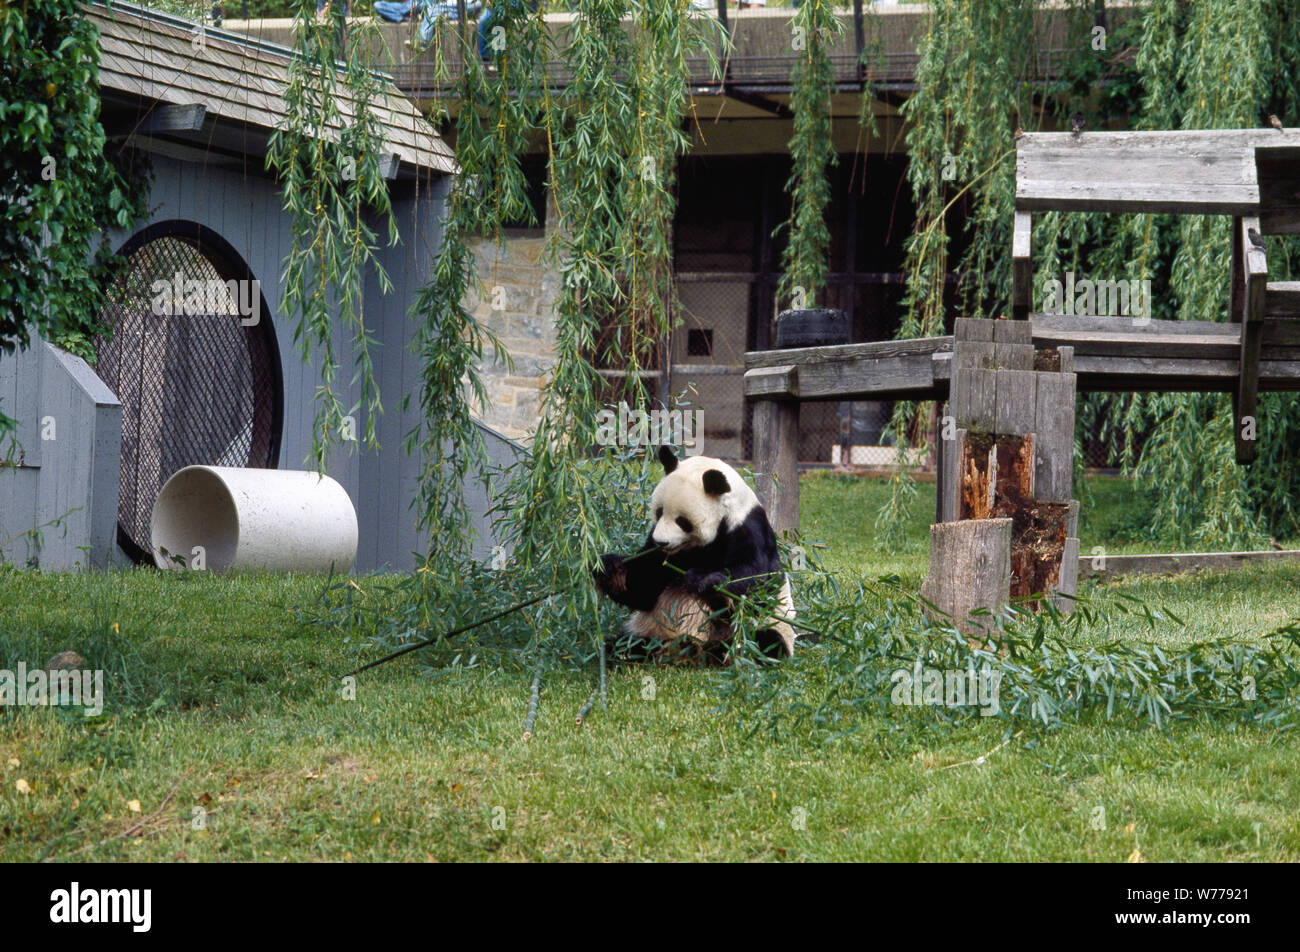 A giant panda, the star attraction at the Smithsonian Institution's National Zoo, Washington, D.C Physical description: 1 transparency : color ; 4 x 5 in. or smaller.  Notes: Title, date, and keywords provided by the photographer.; Digital image produced by Carol M. Highsmith to represent her original film transparency; some details may differ between the film and the digital images.; Forms part of the Selects Series in the Carol M. Highsmith Archive.; Gift and purchase; Carol M. Highsmith; 2011; (DLC/PP-2011:124).; Stock Photo